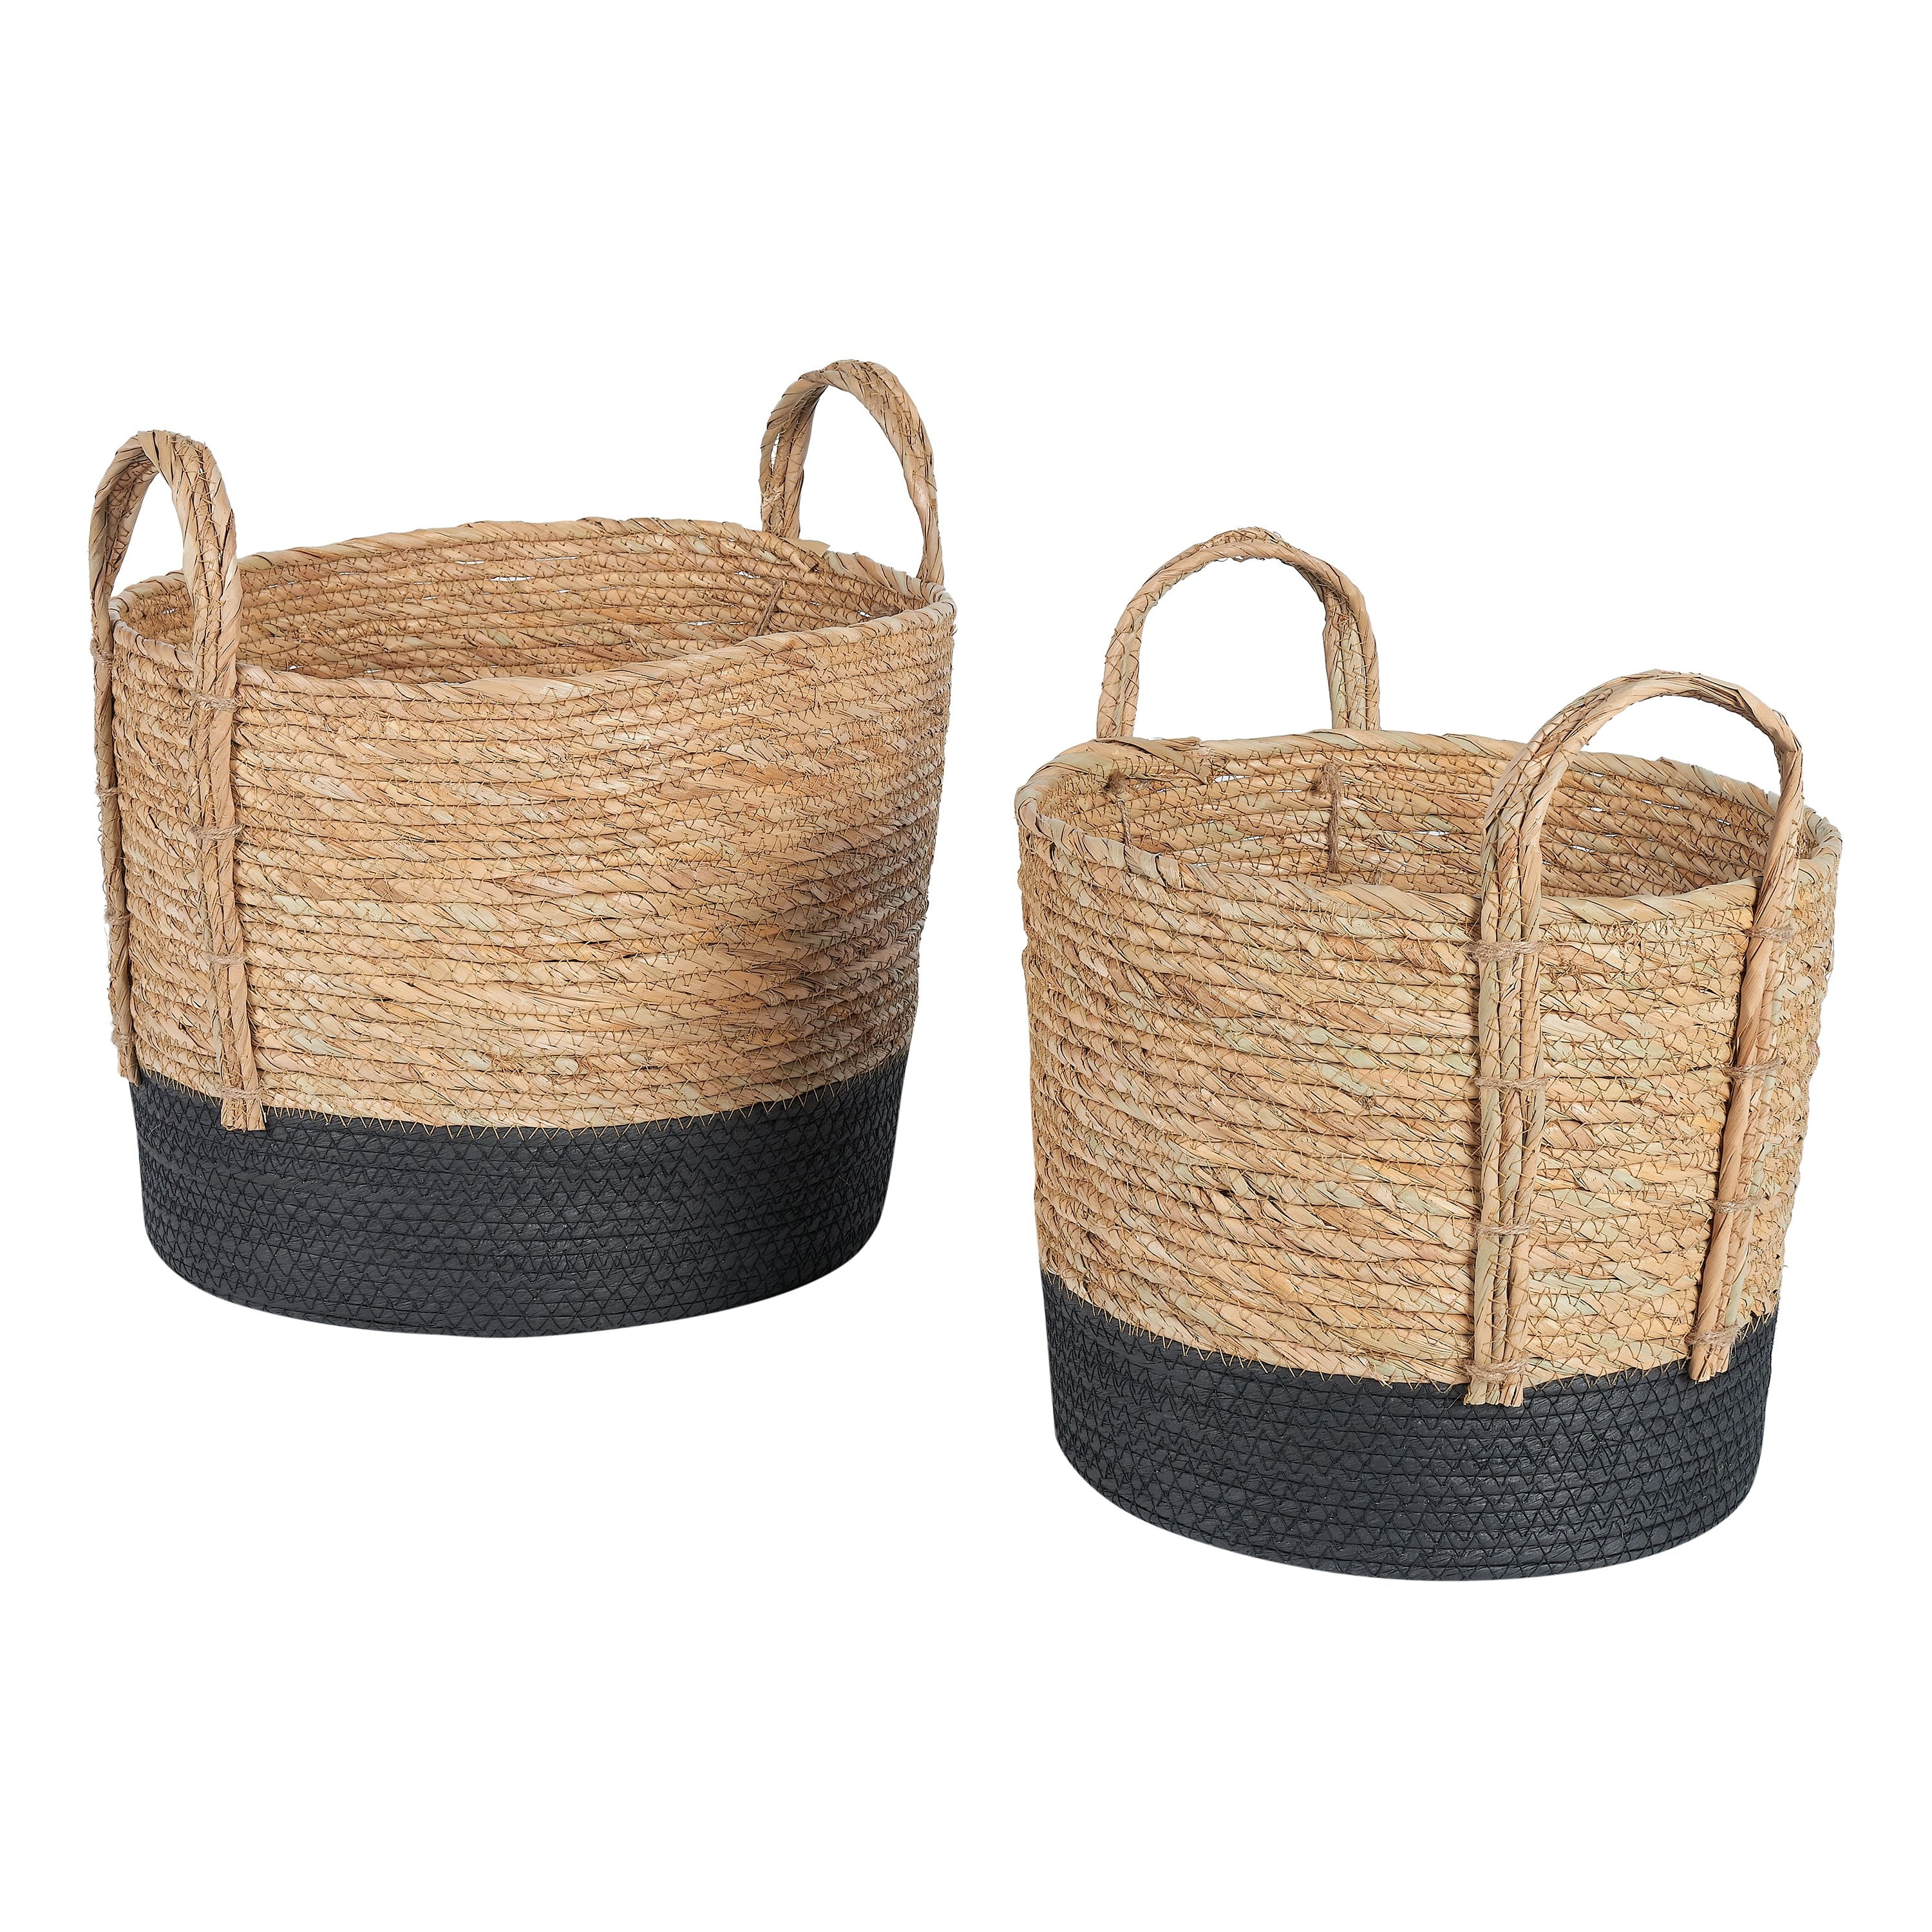 Gorgeous Stackable XXL Wire Baskets For Pantry Storage and Organization -  Set of 2 Pantry Storage Bins With Handles - Large Metal Food Baskets Keep